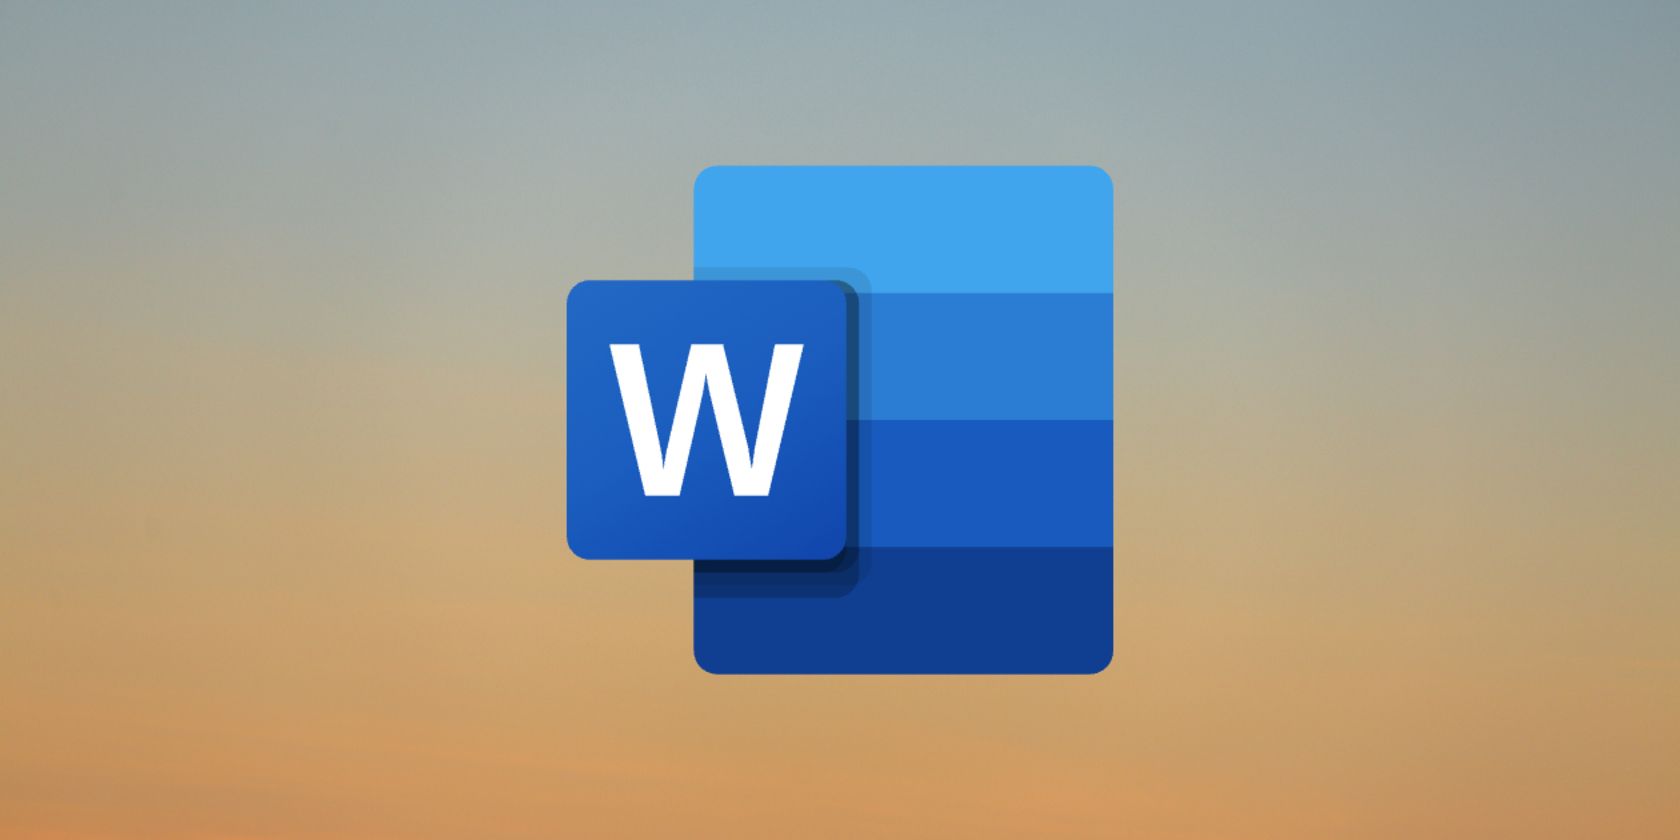 Microsoft Word logo on a gradient background